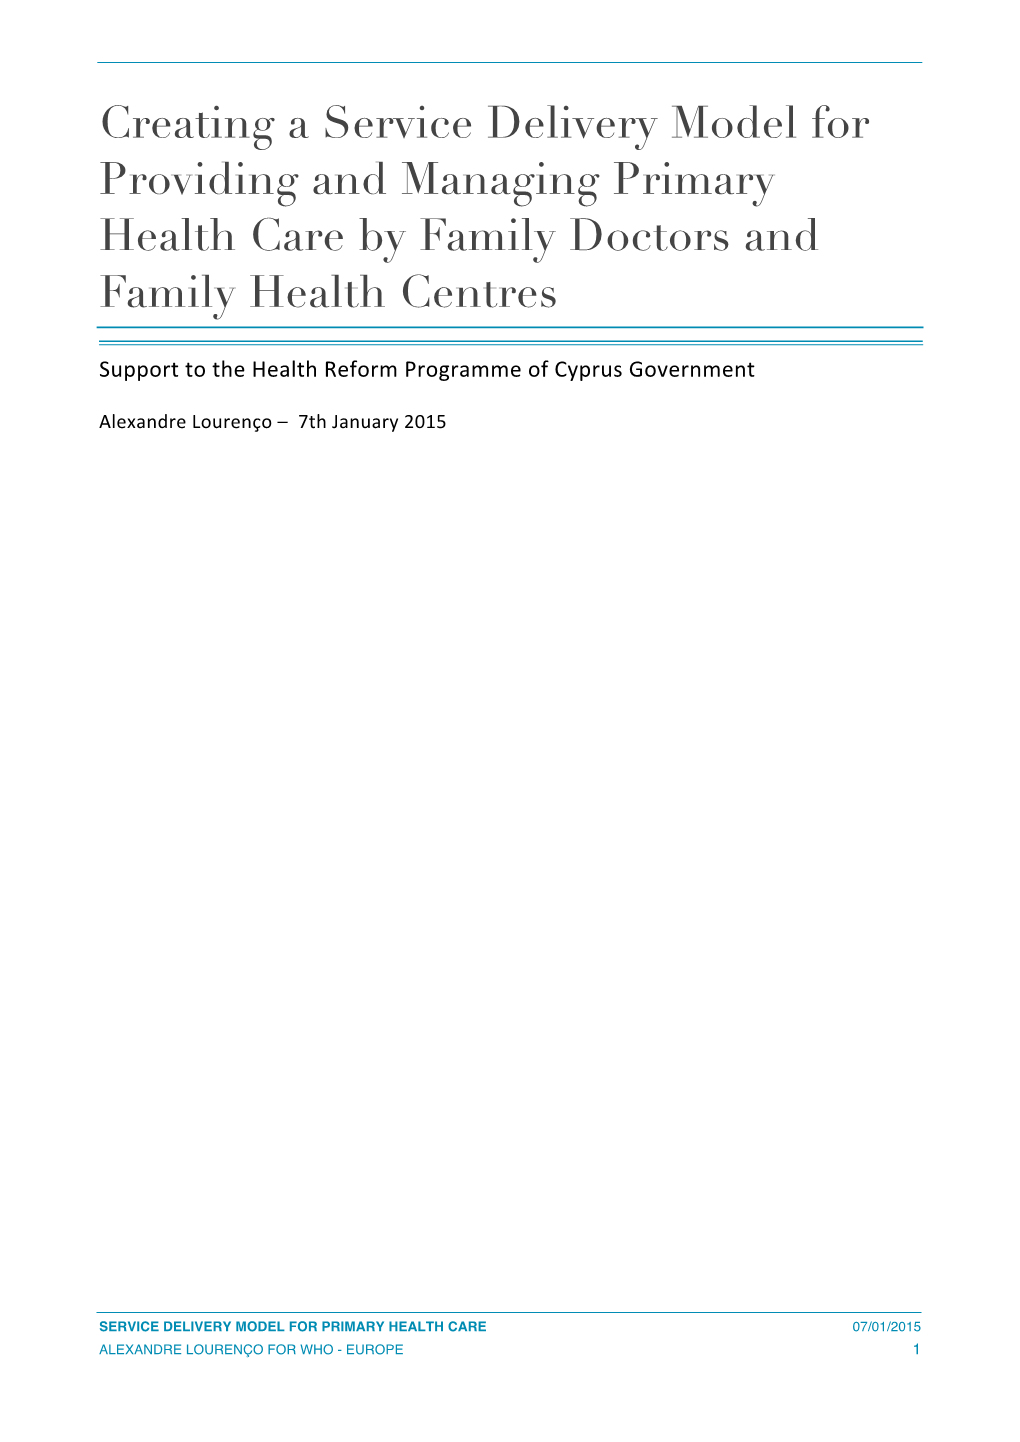 Creating a Service Delivery Model for Providing and Managing Primary Health Care by Family Doctors and Family Health Centres